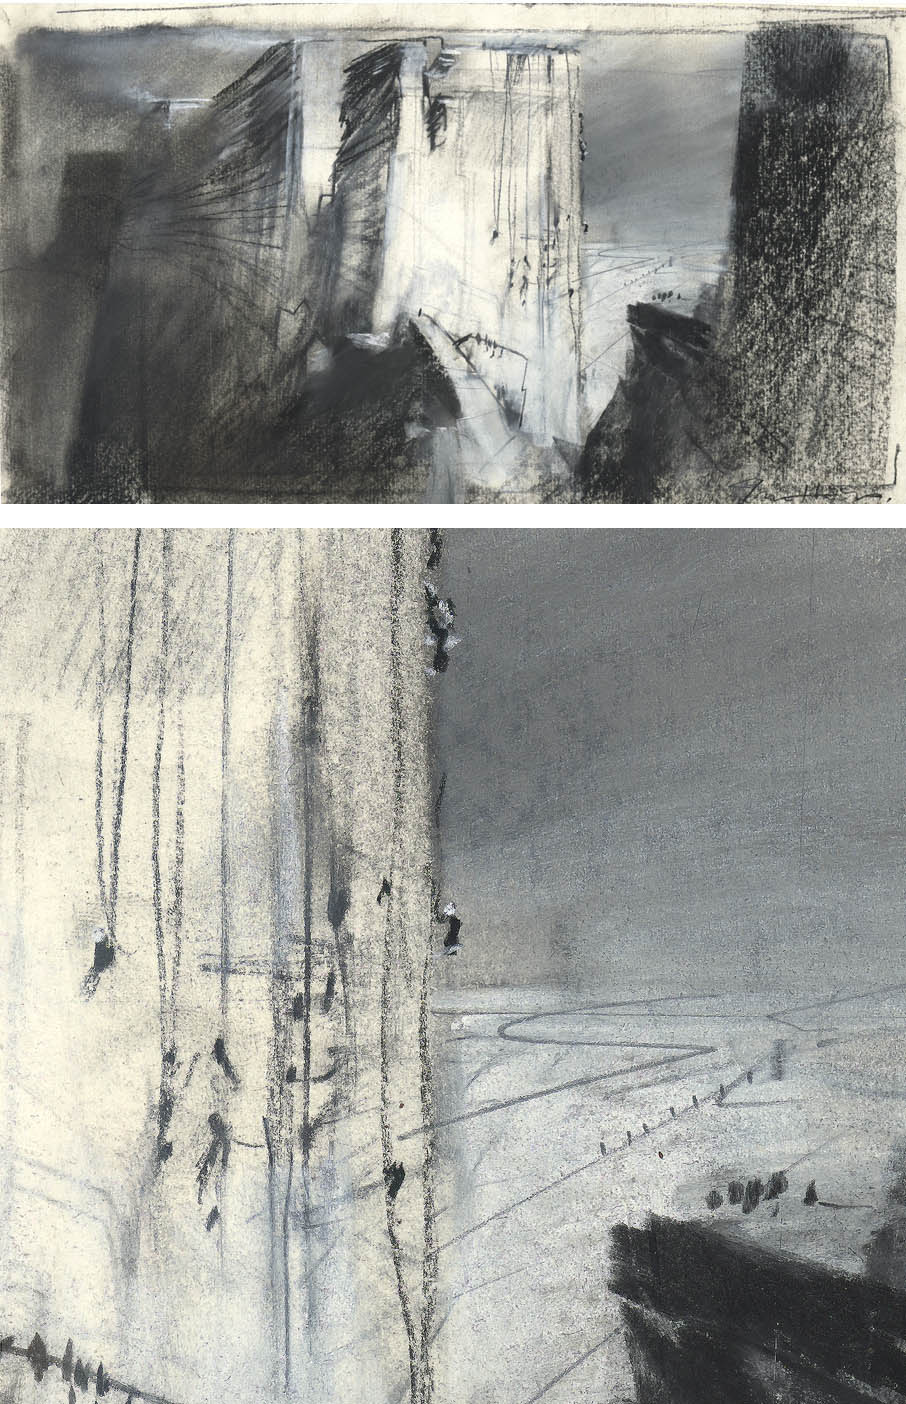 John Harris | Scaling the Wall, second sketch